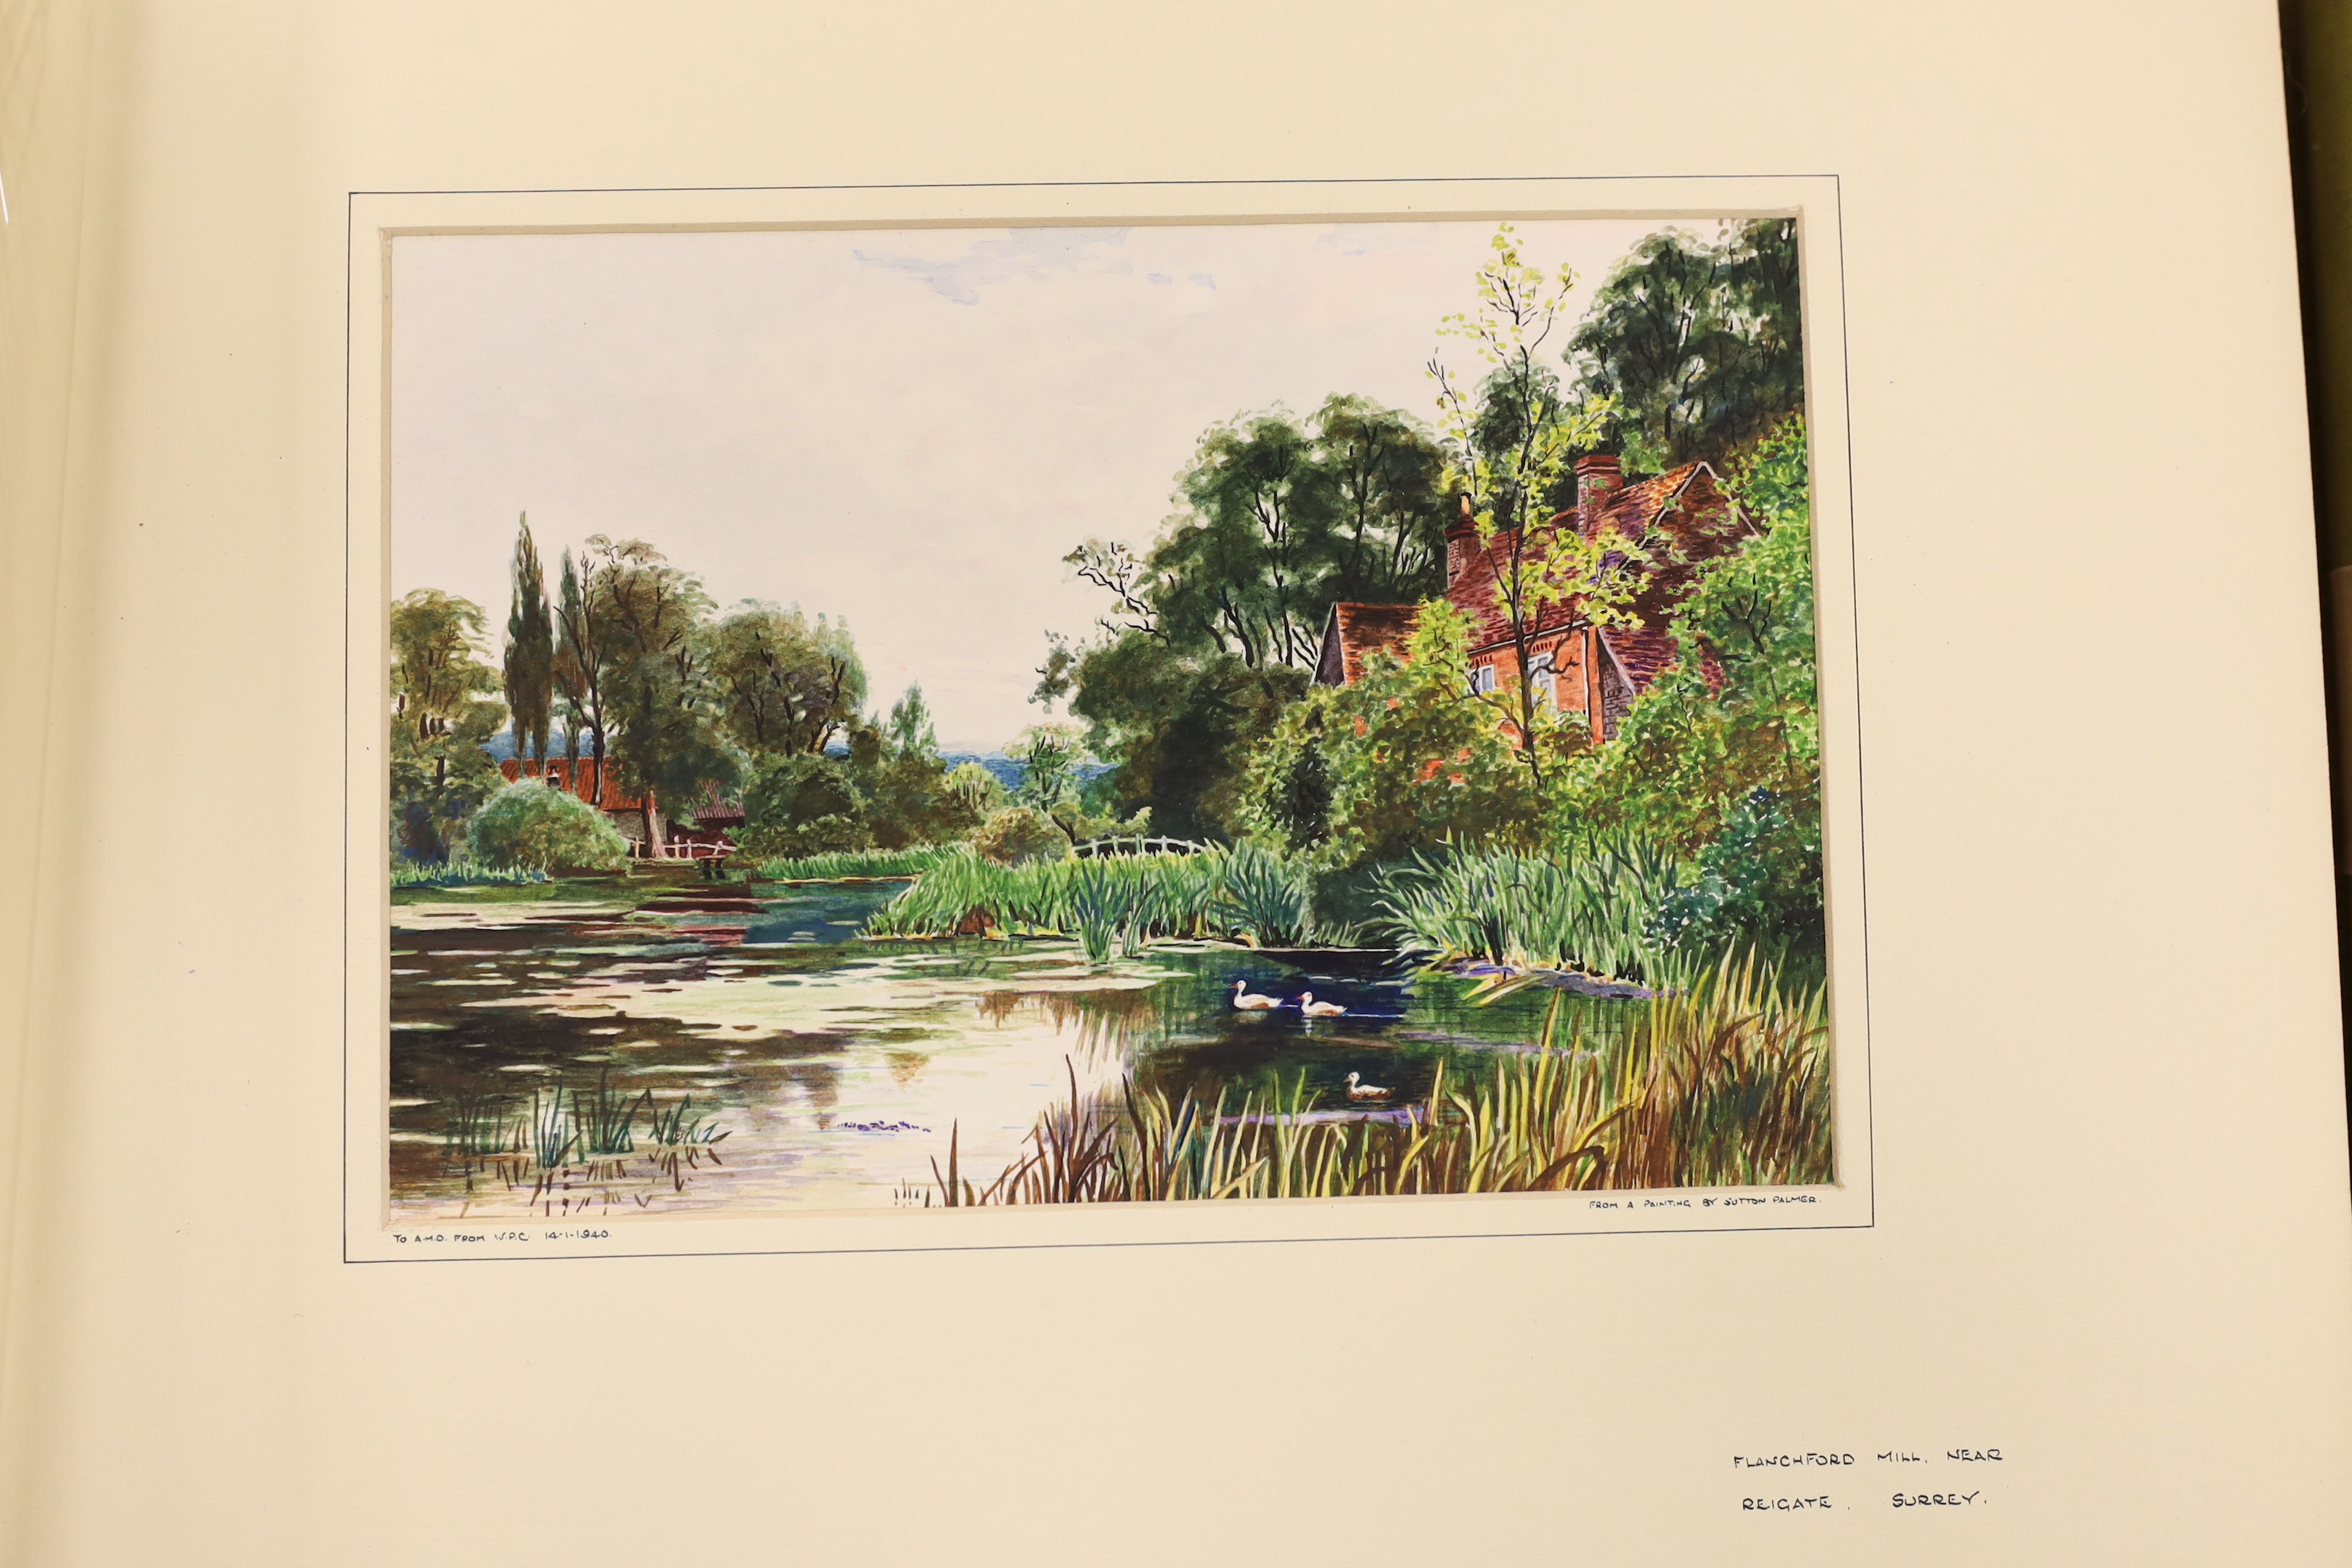 Two 20th century albums of watercolours, pencil sketches, prints, and black and white photographs including many after Sutton Palmer, river landscapes and other scenes around England